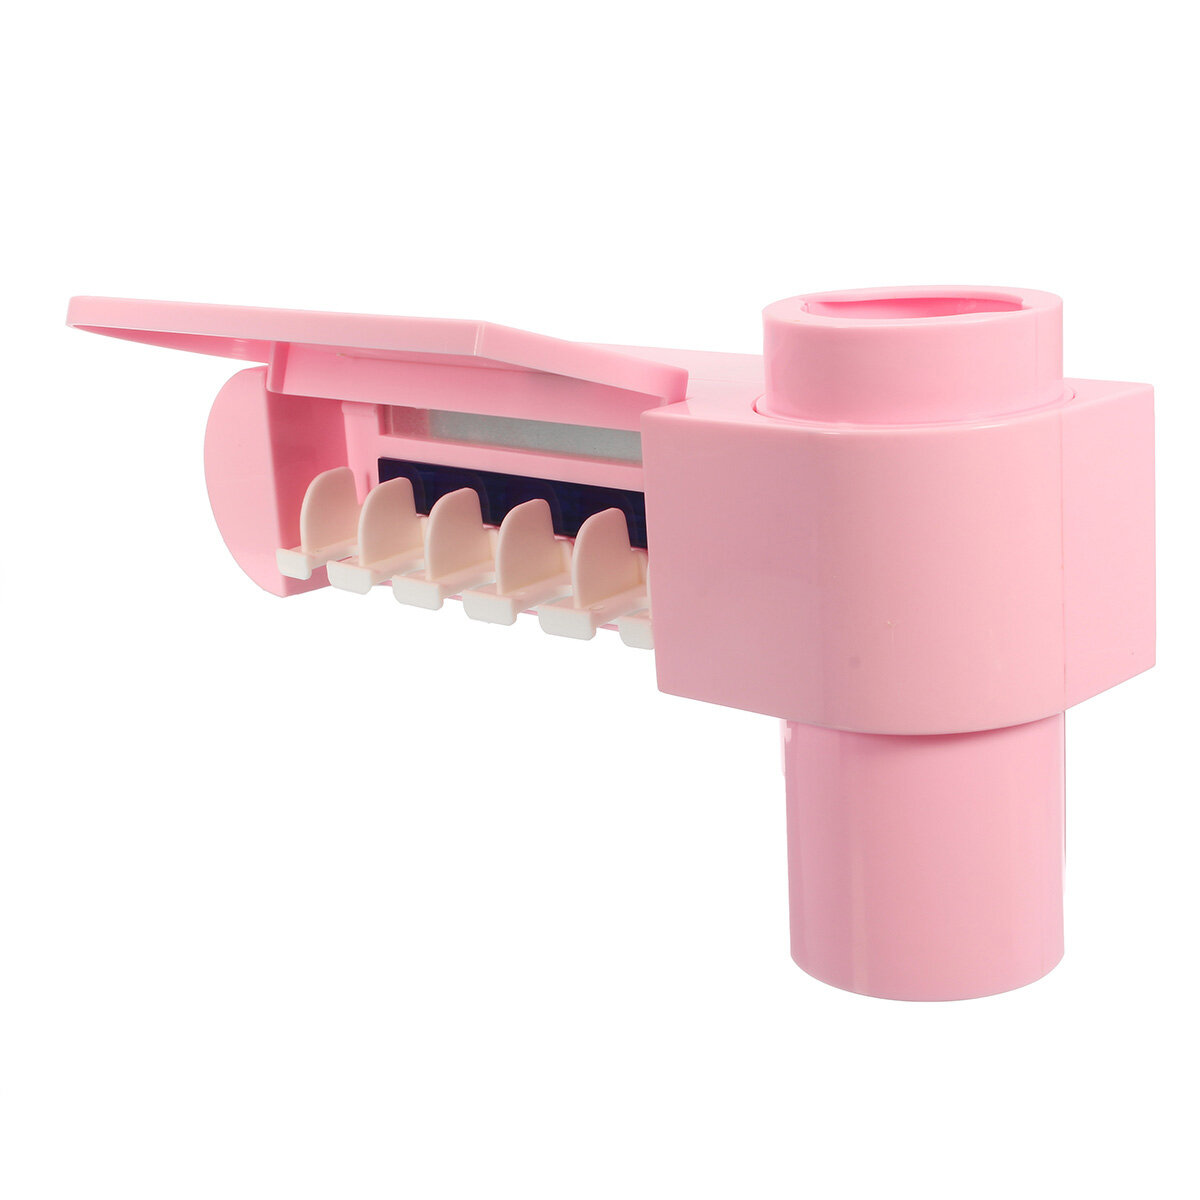 MC-891 220V Wall-Mounted Far-infrared Toothbrush Sterilizer Holder With Toothpaste Tube